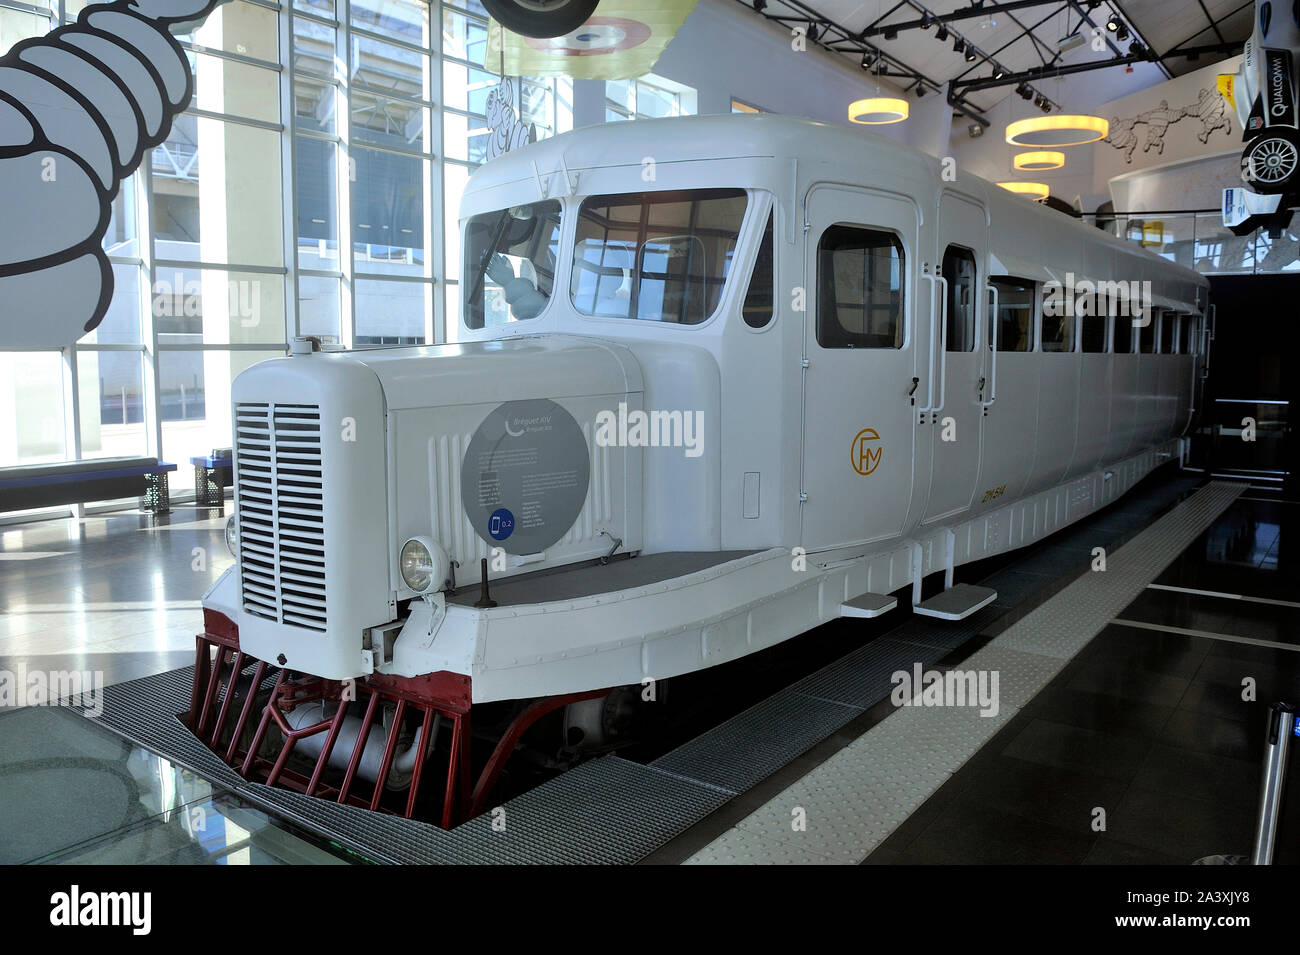 The Micheline invented by Michelin in 1930, the first railcar on display in the lobby of the Michelin museum Stock Photo